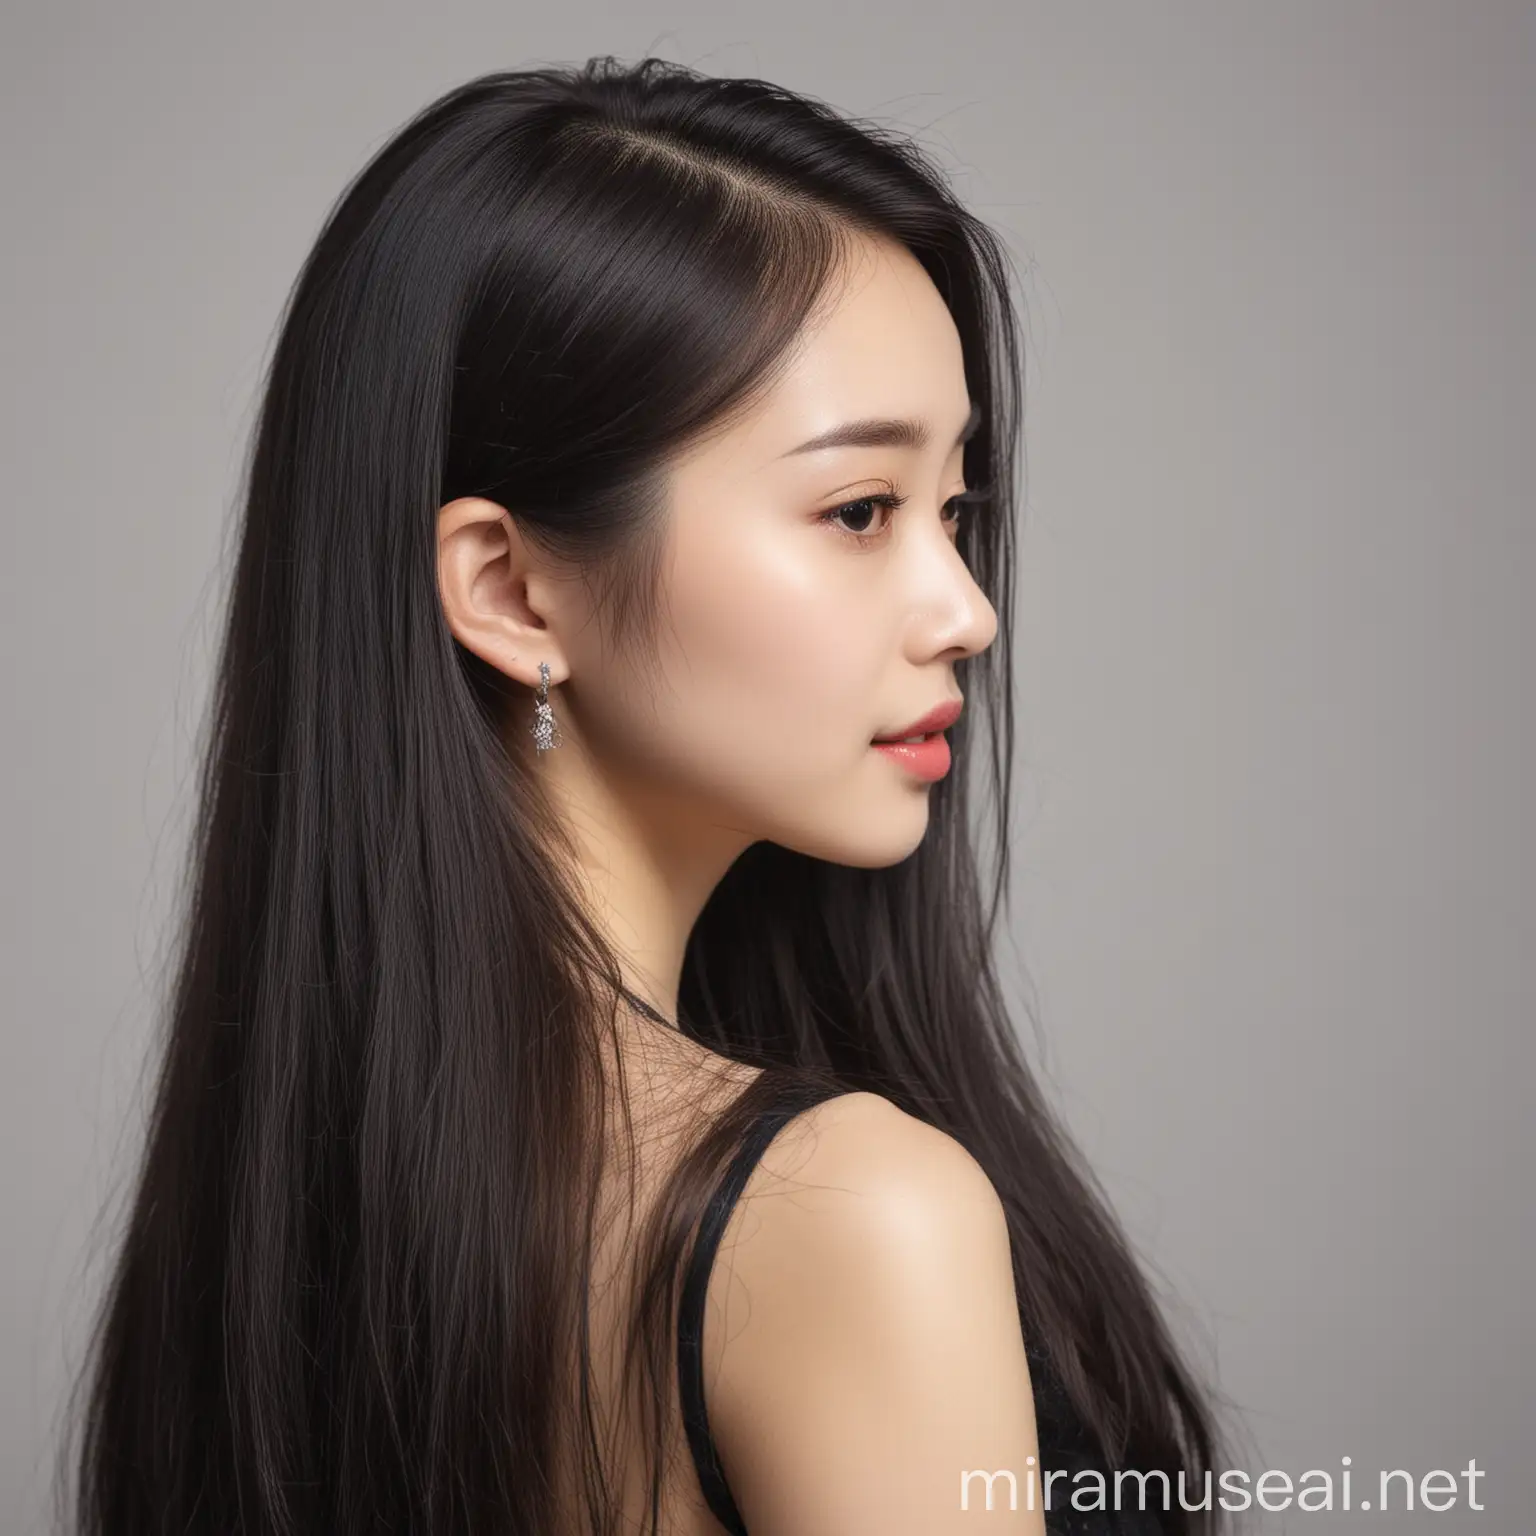 Beautiful Chinese Woman with Long Hair in Profile Portrait